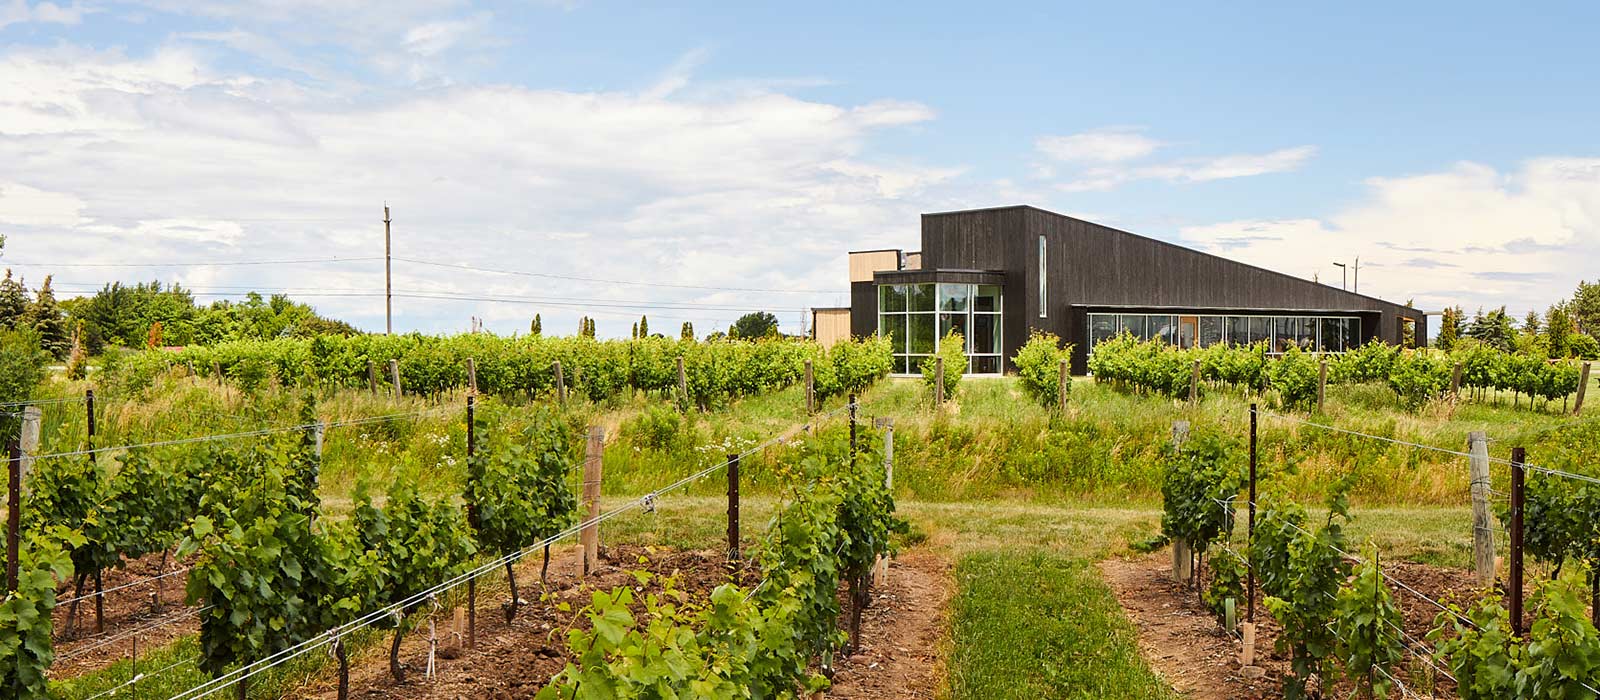 About Lakeview Wine Co. Niagara Winery